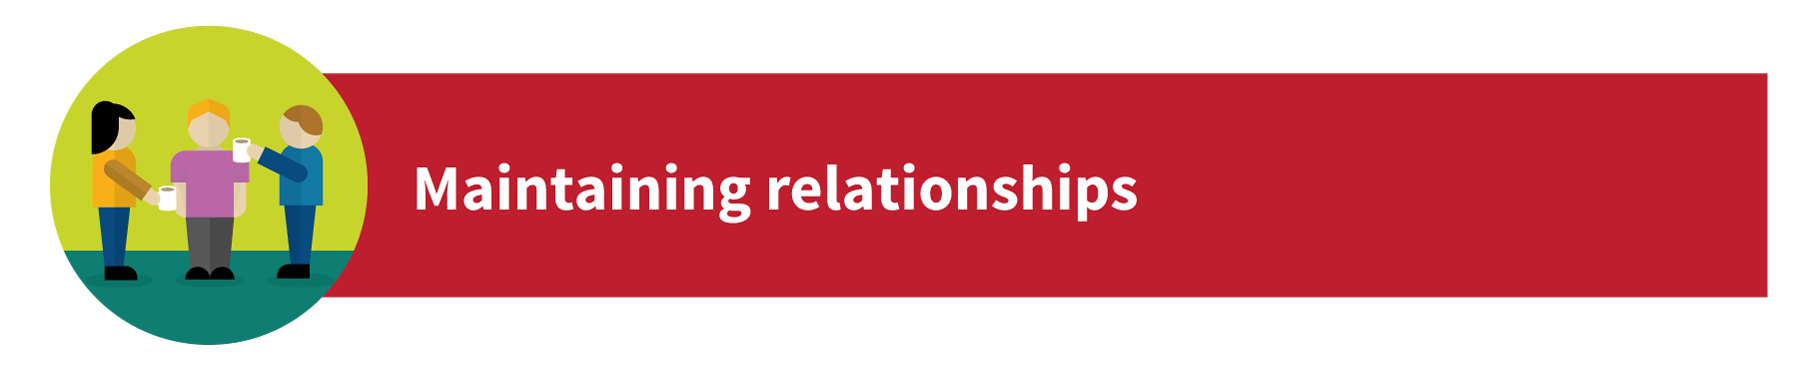 Service commitment 3 - Maintaining relationships